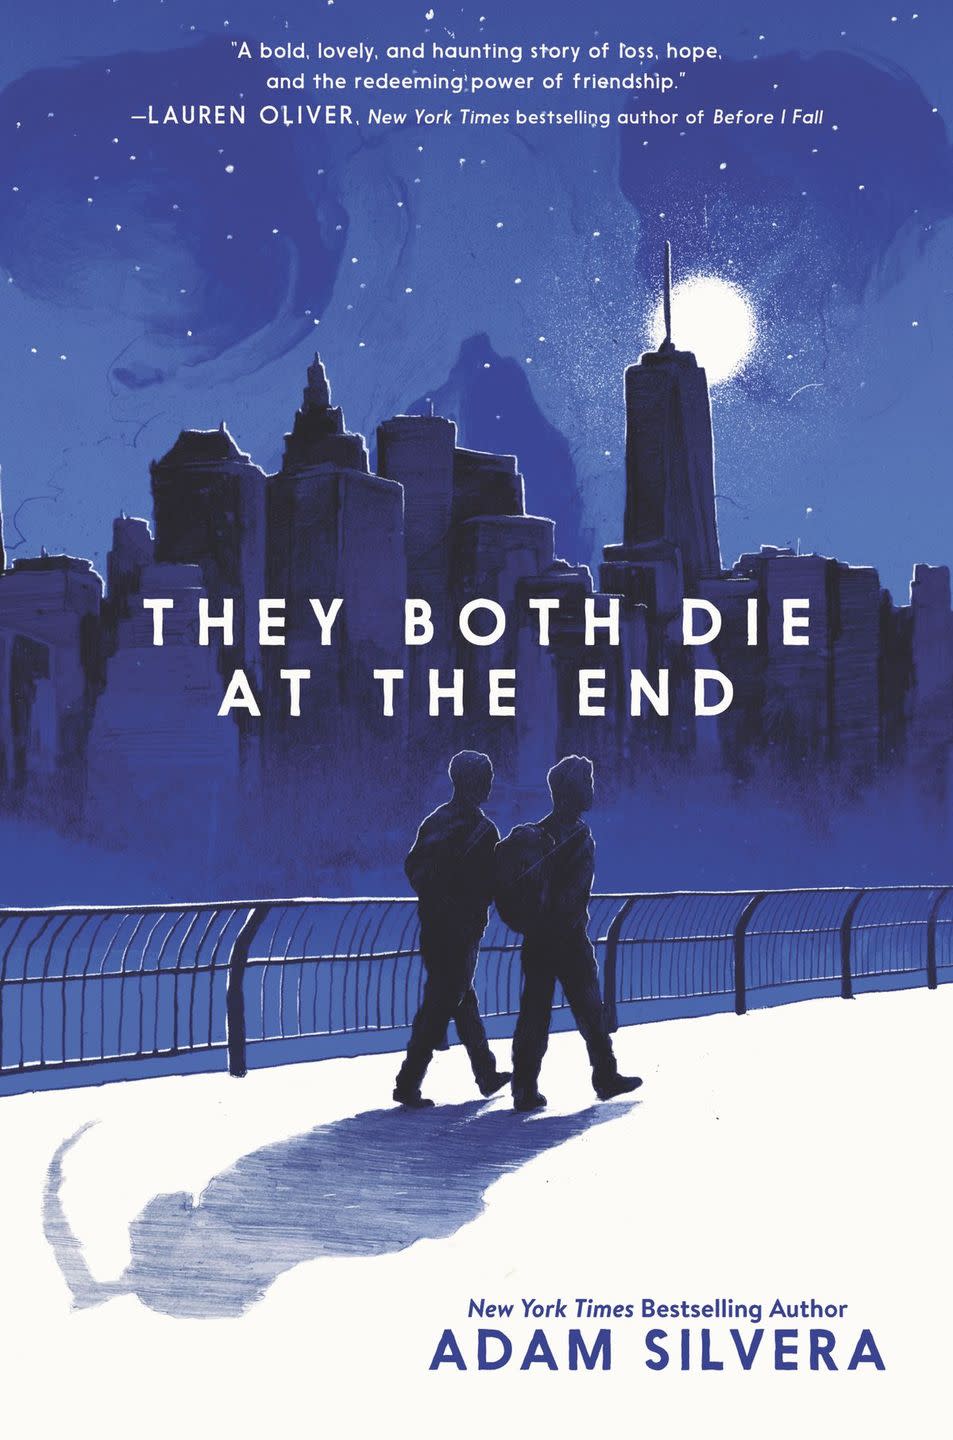 4) “They Both Die at the End” by Adam Silvera